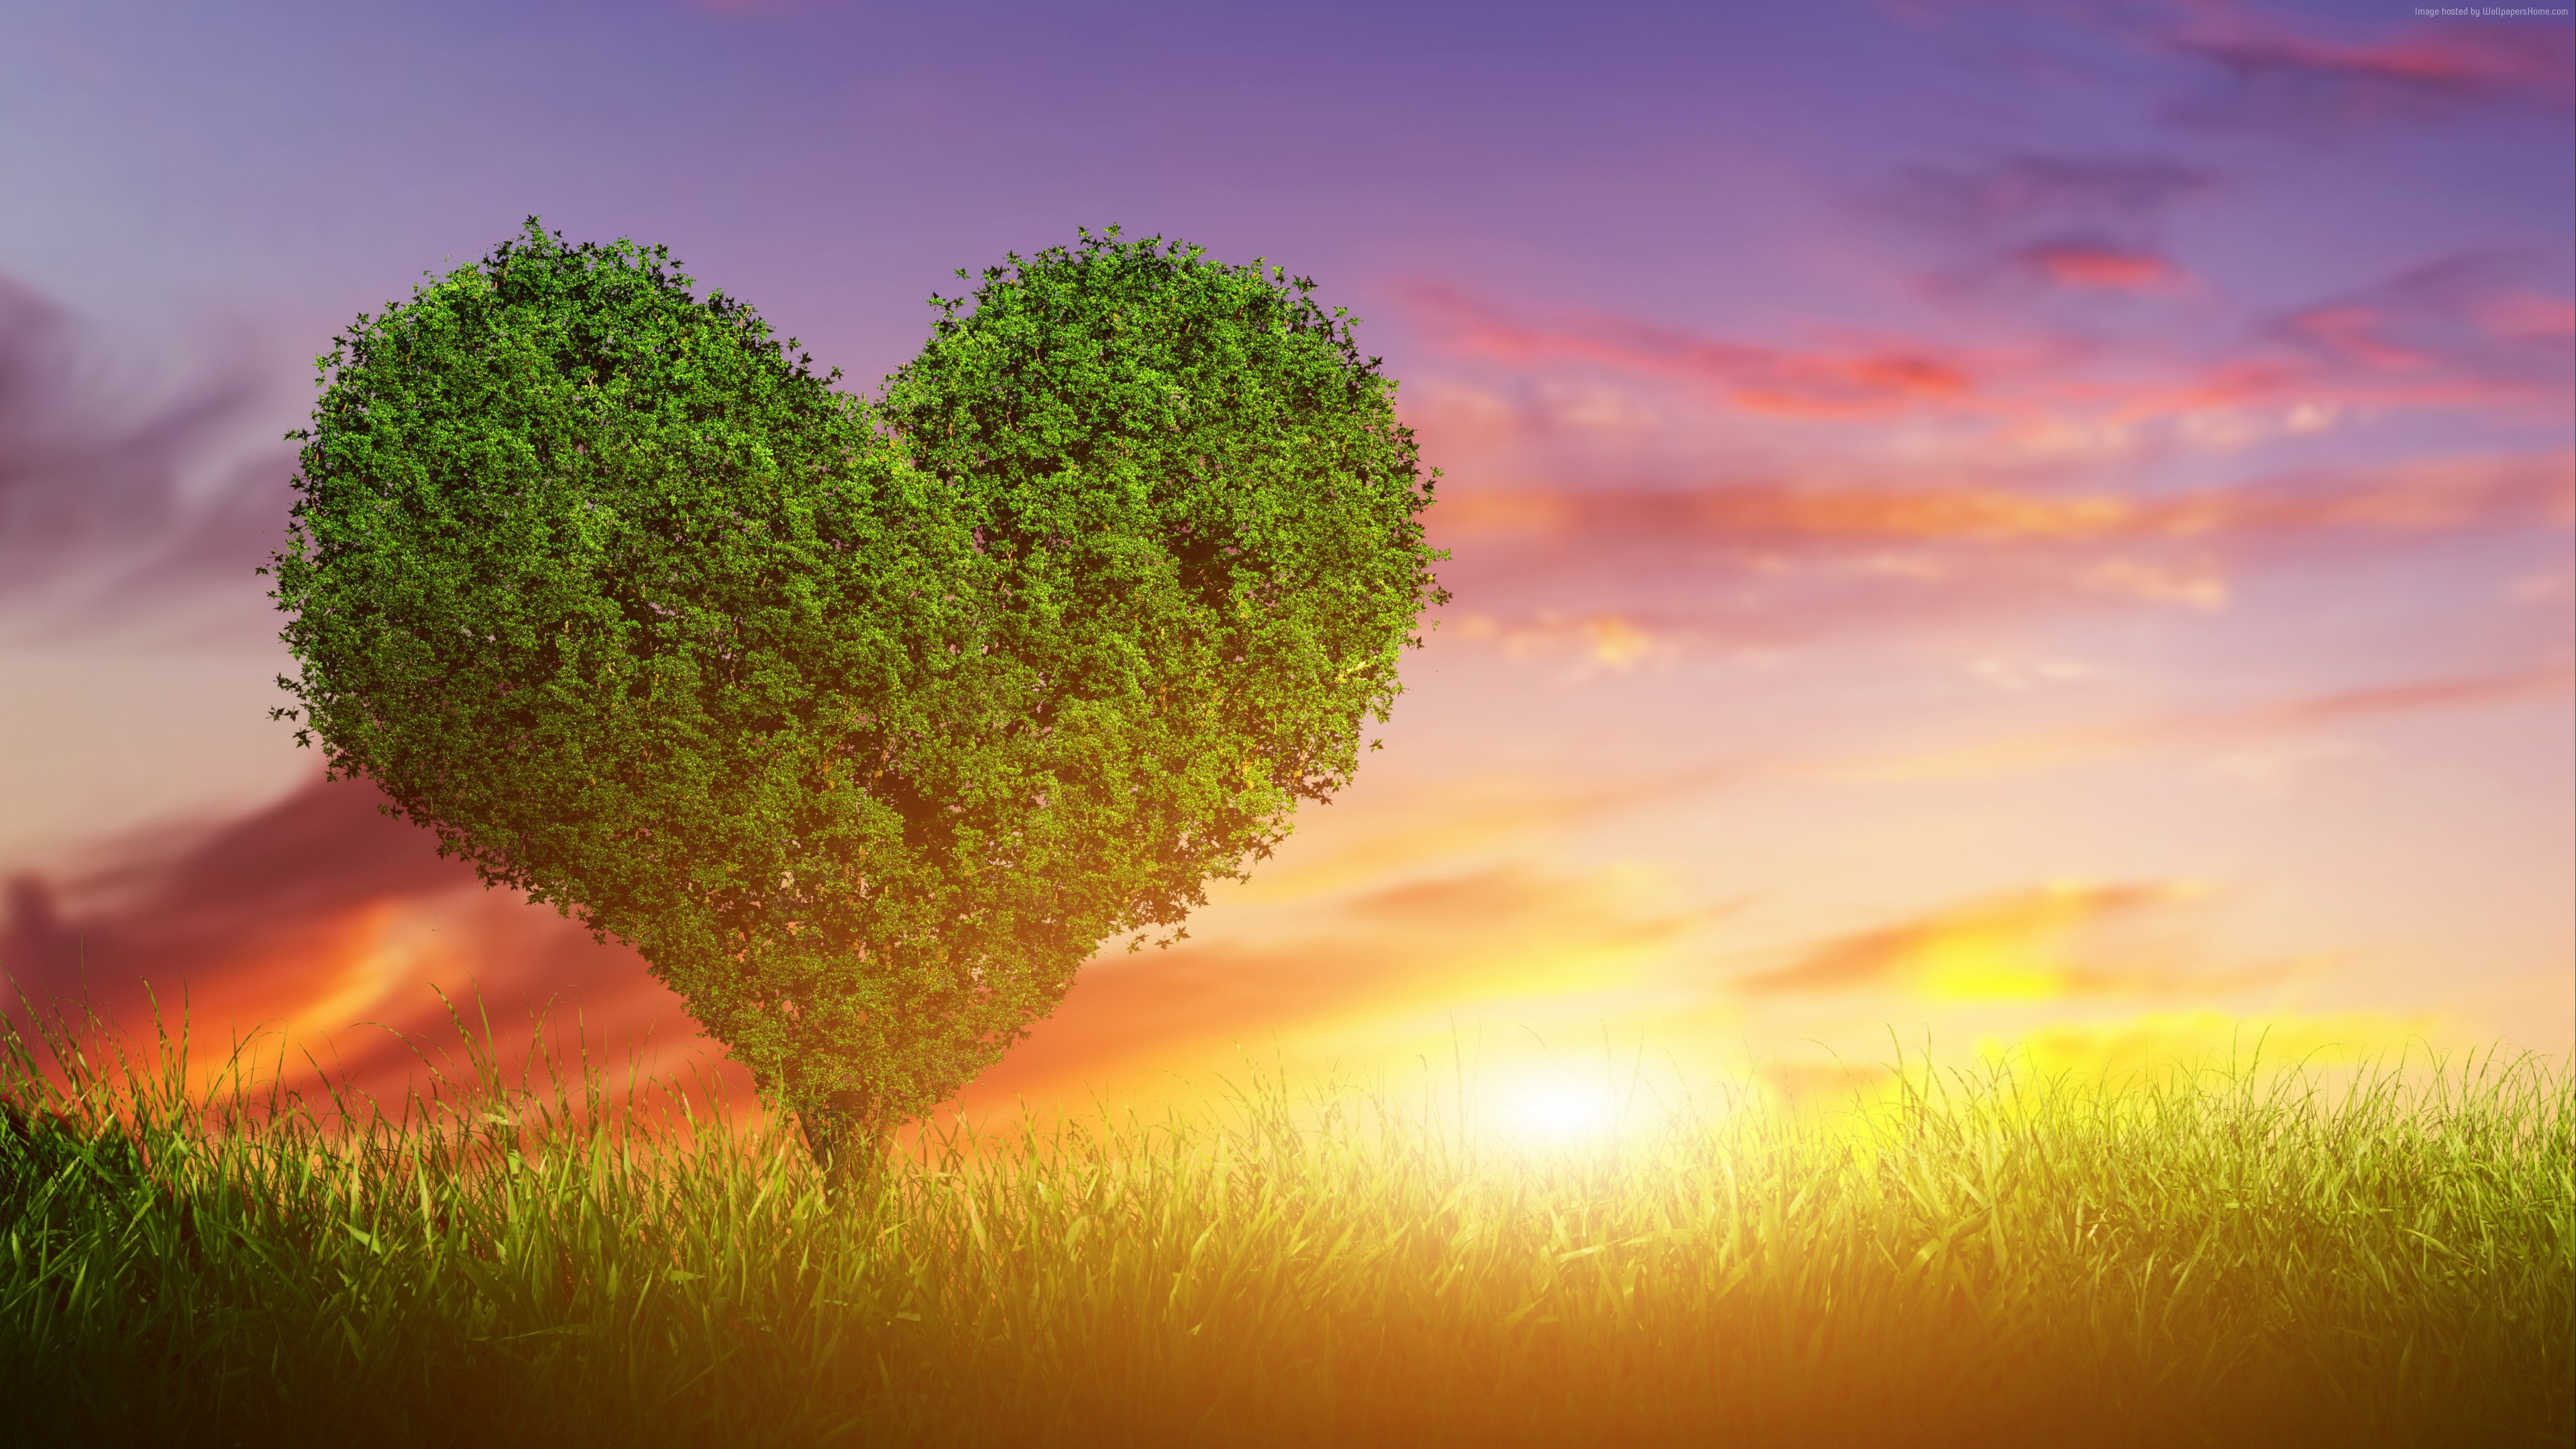 Stock Images love image, heart, tree, 5k, Stock Images